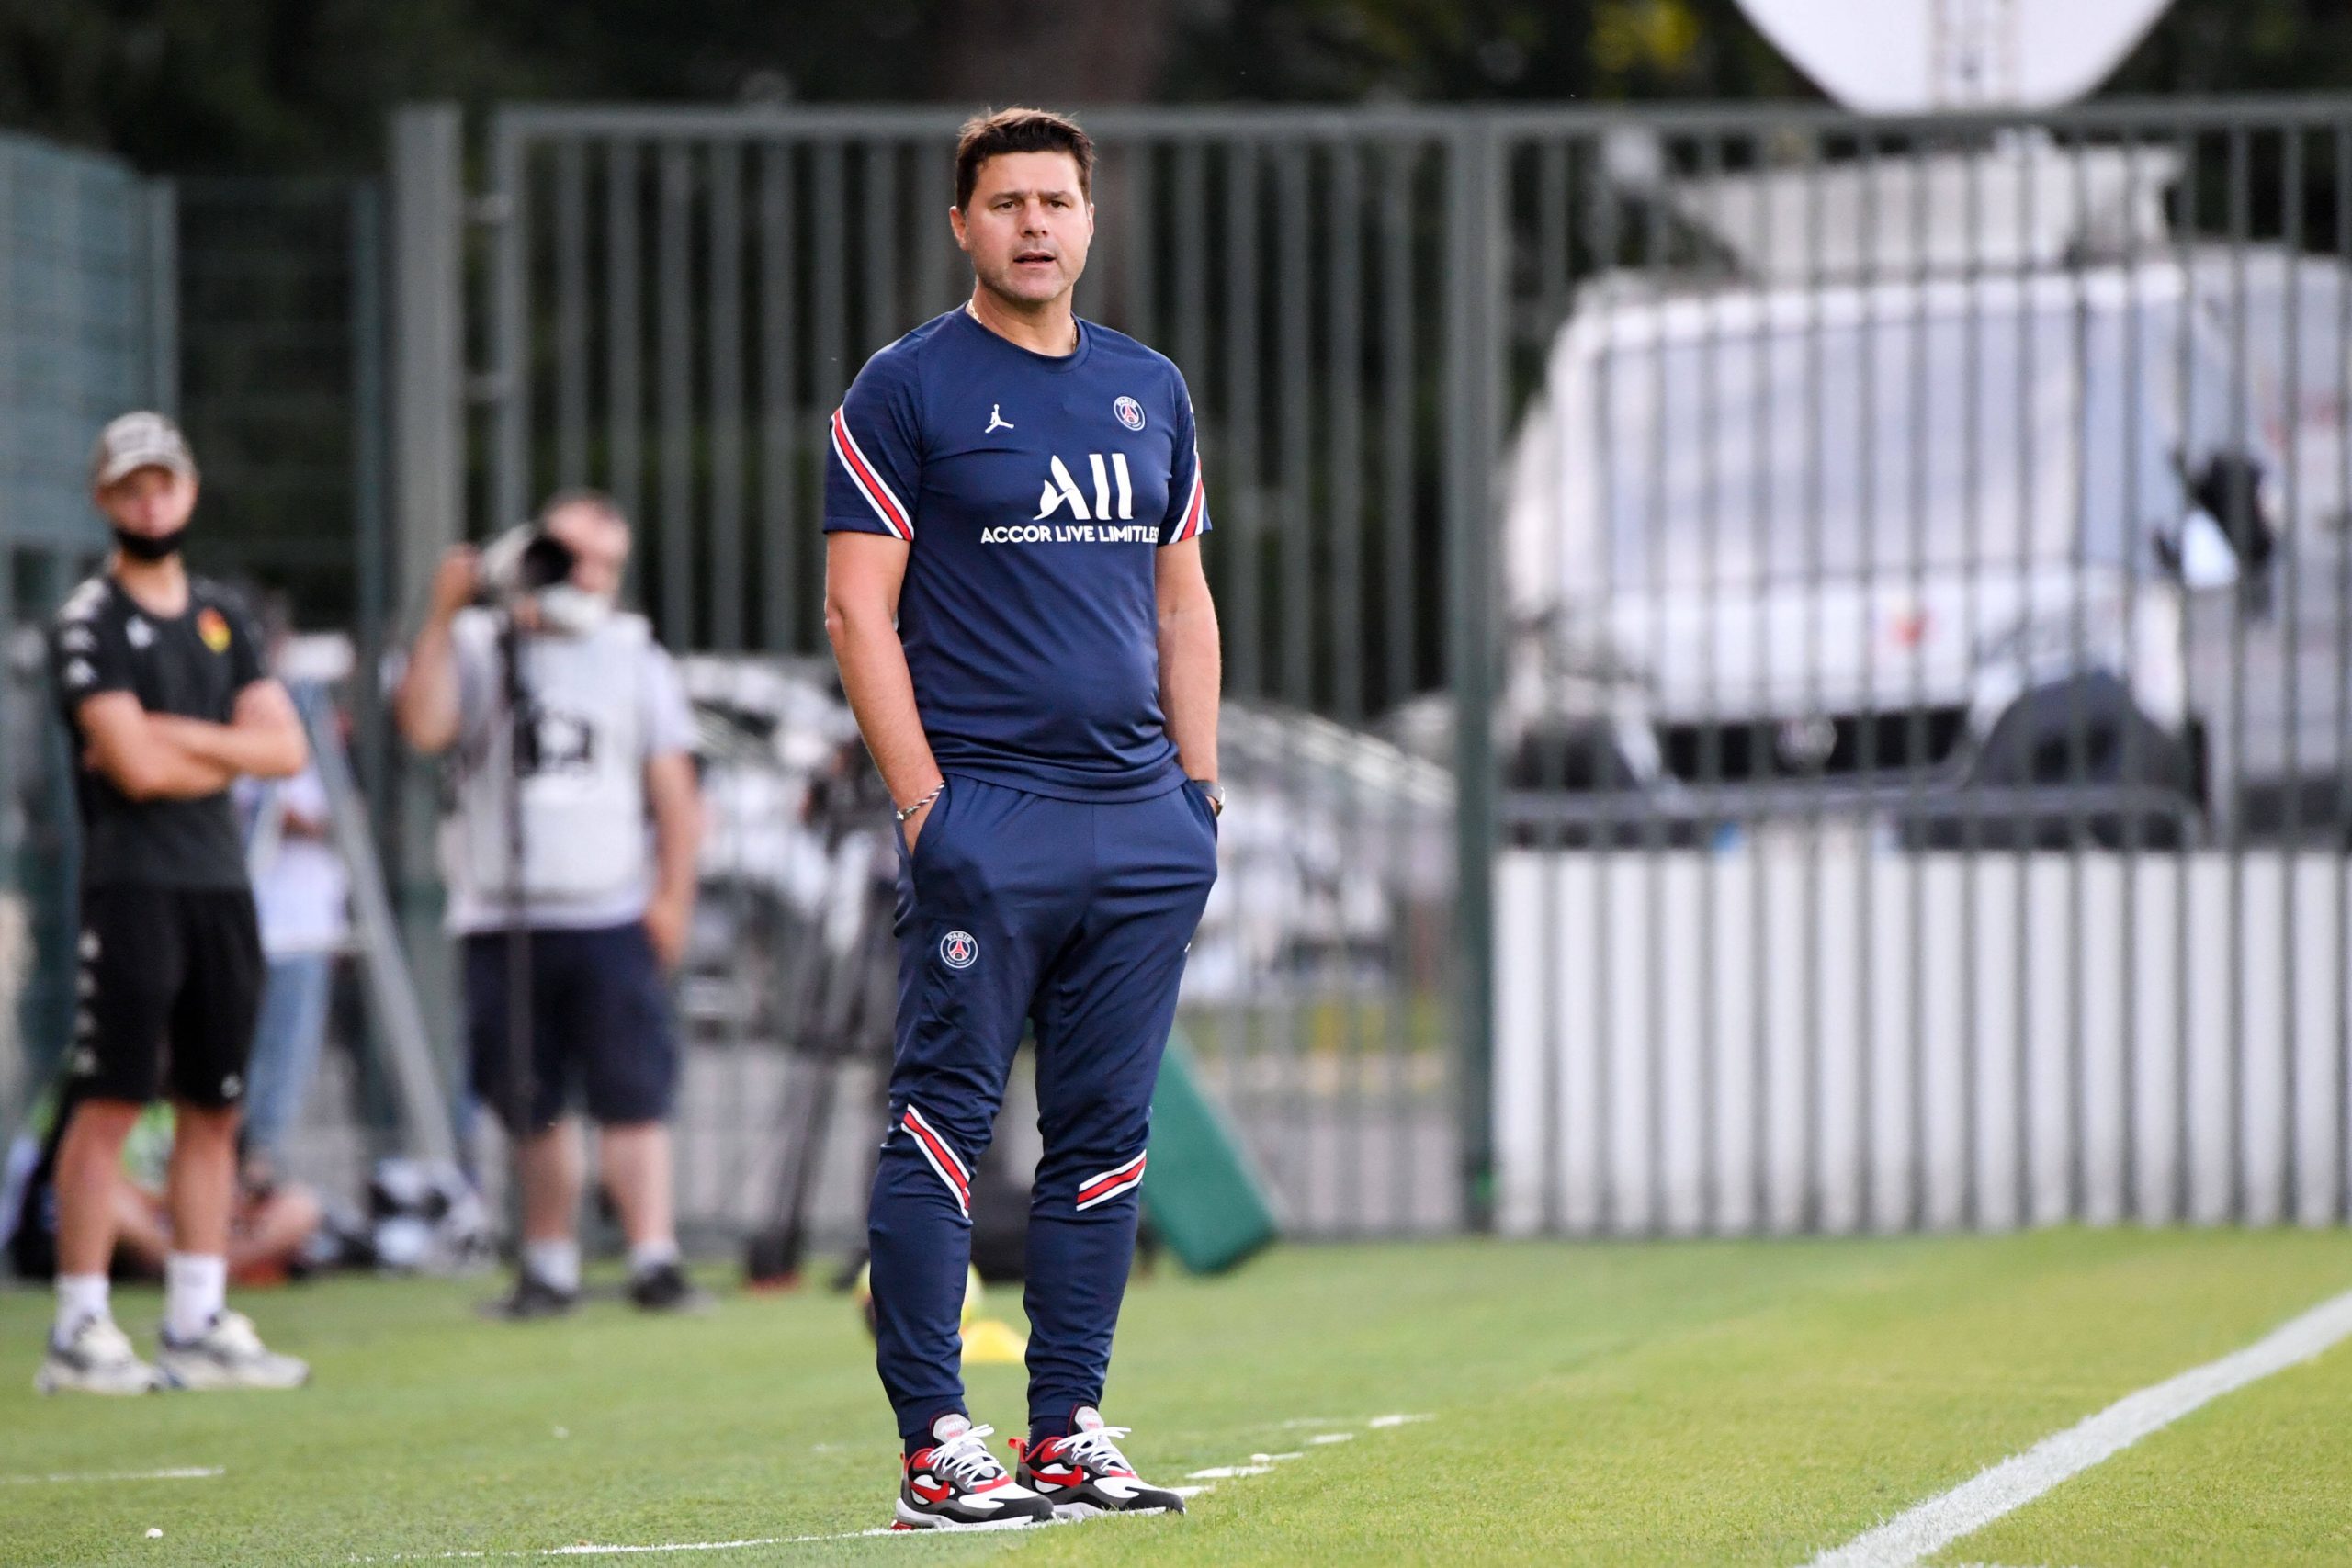 PSG sporting director Leonardo reveals that Mauricio Pochettino has not asked to leave the club amidst Manchester United interest.